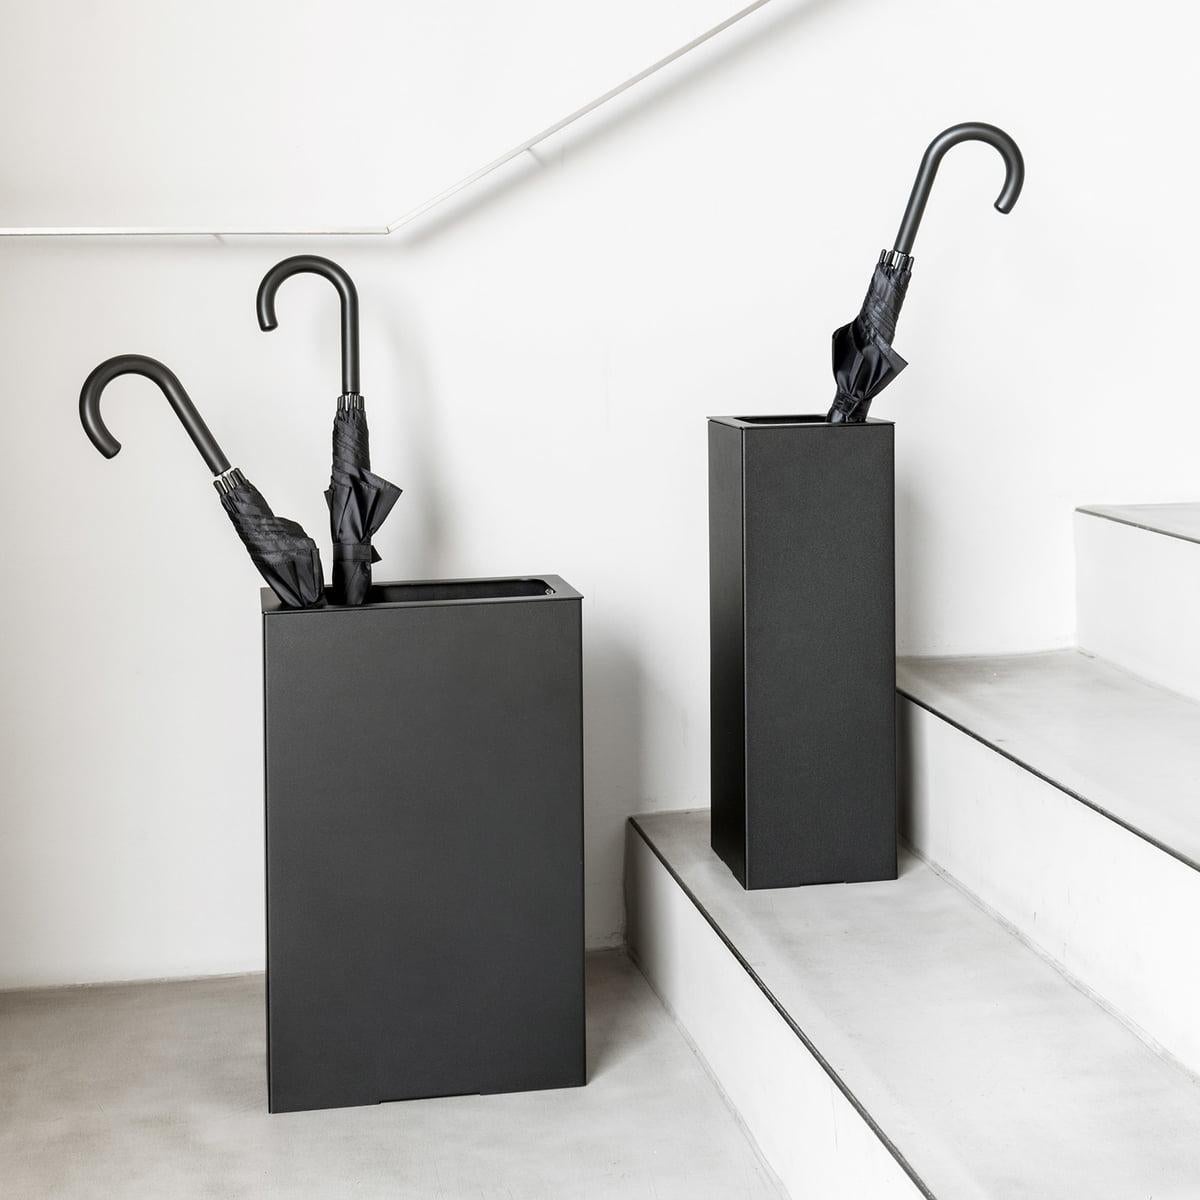 In powder-coated steel
Creative space sensation. The angle umbrella stand is made of black, powder-coated metal and is great as a room divider or screen. Irrespective of use, it is always extremely robust and accommodates any number of garments,